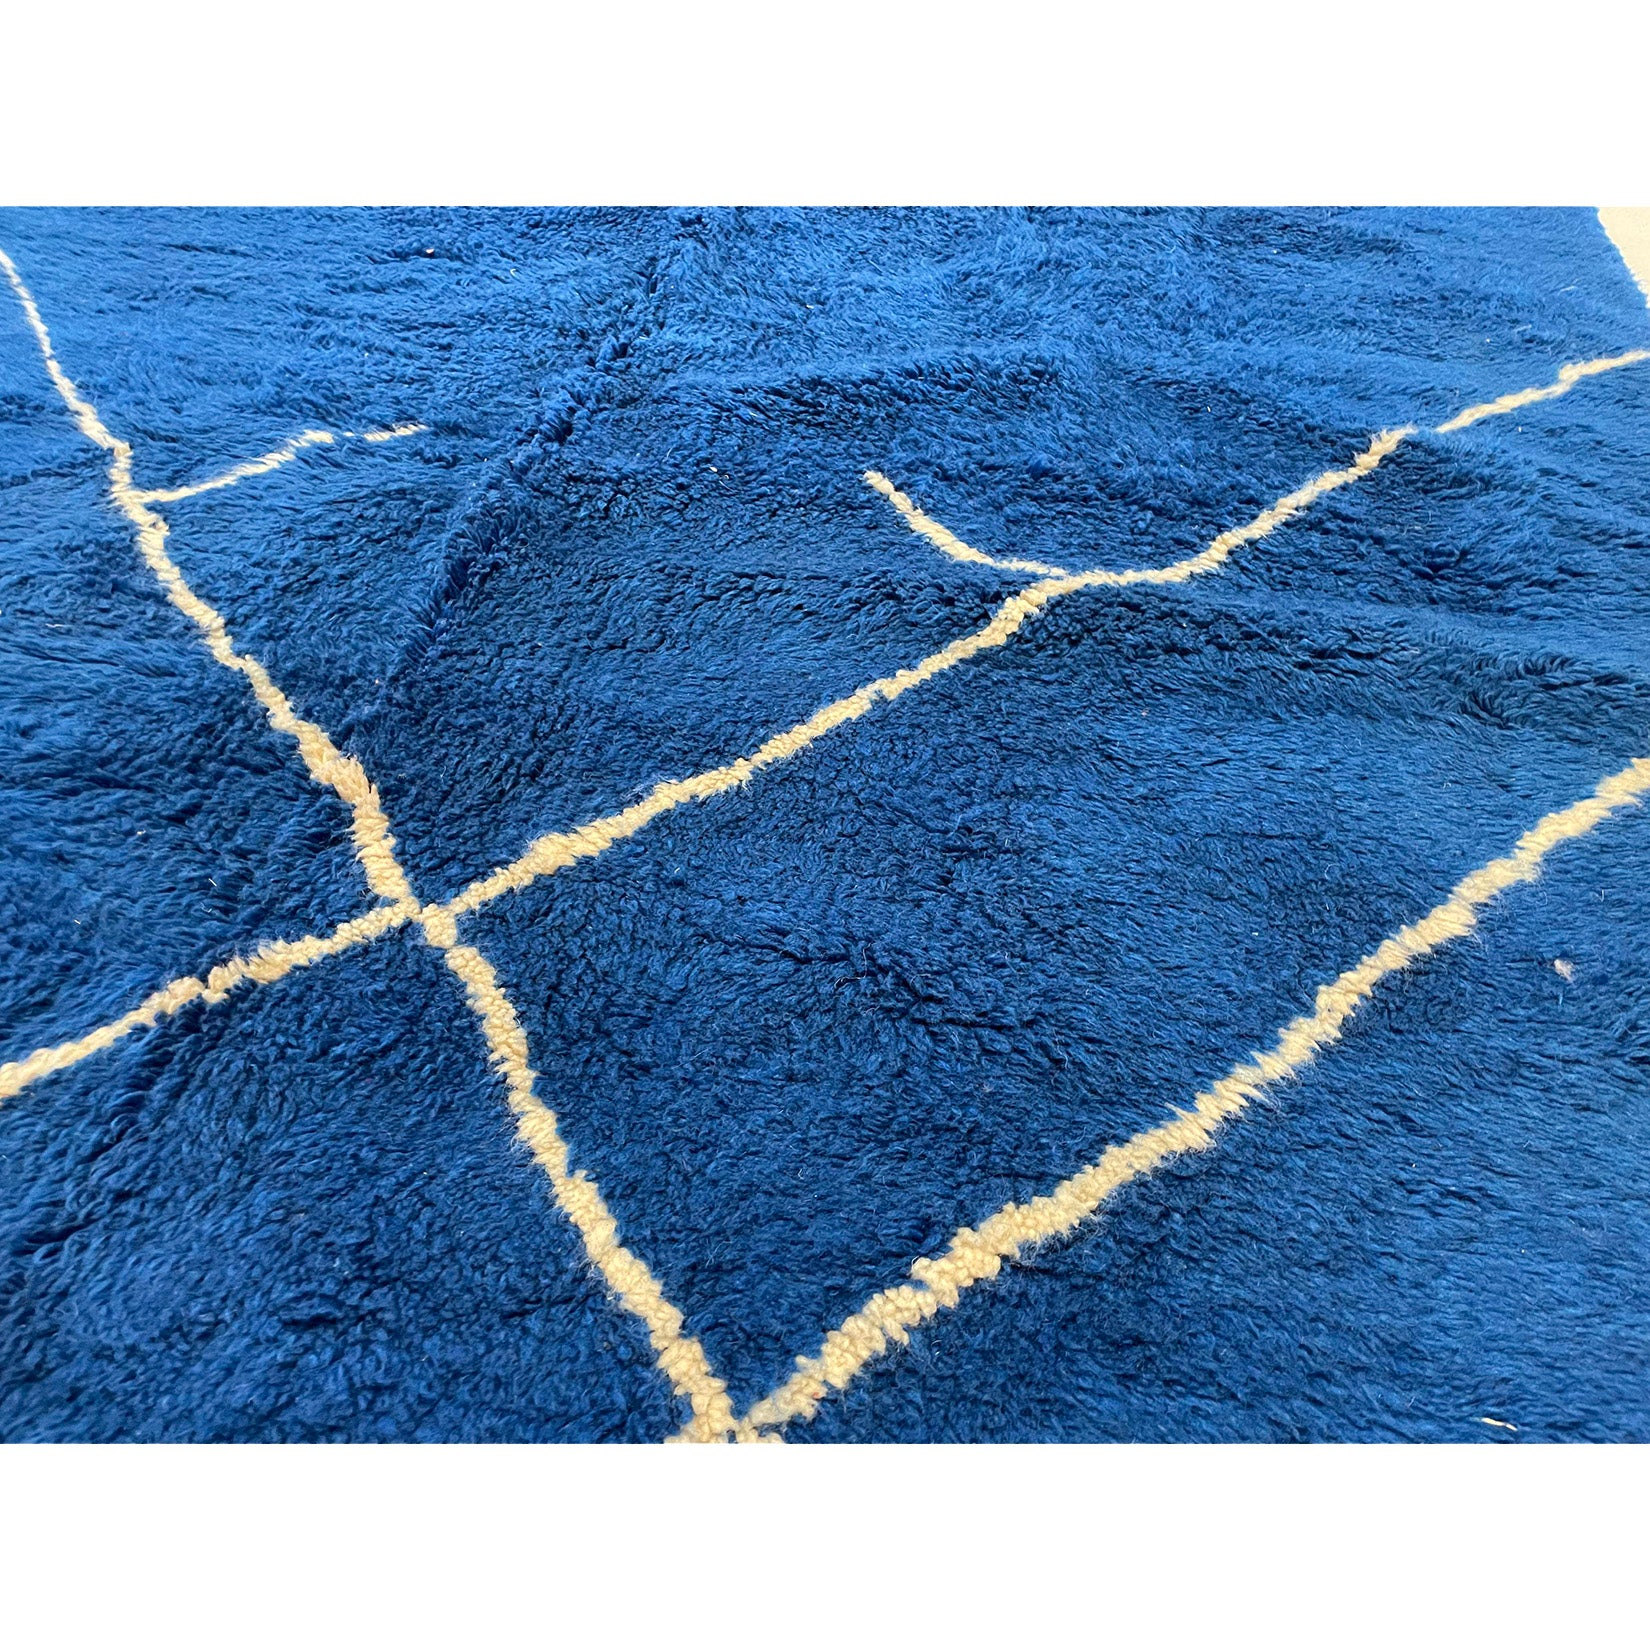 Blue and white Beni Ourain style Moroccan area rug - Kantara | Moroccan Rugs